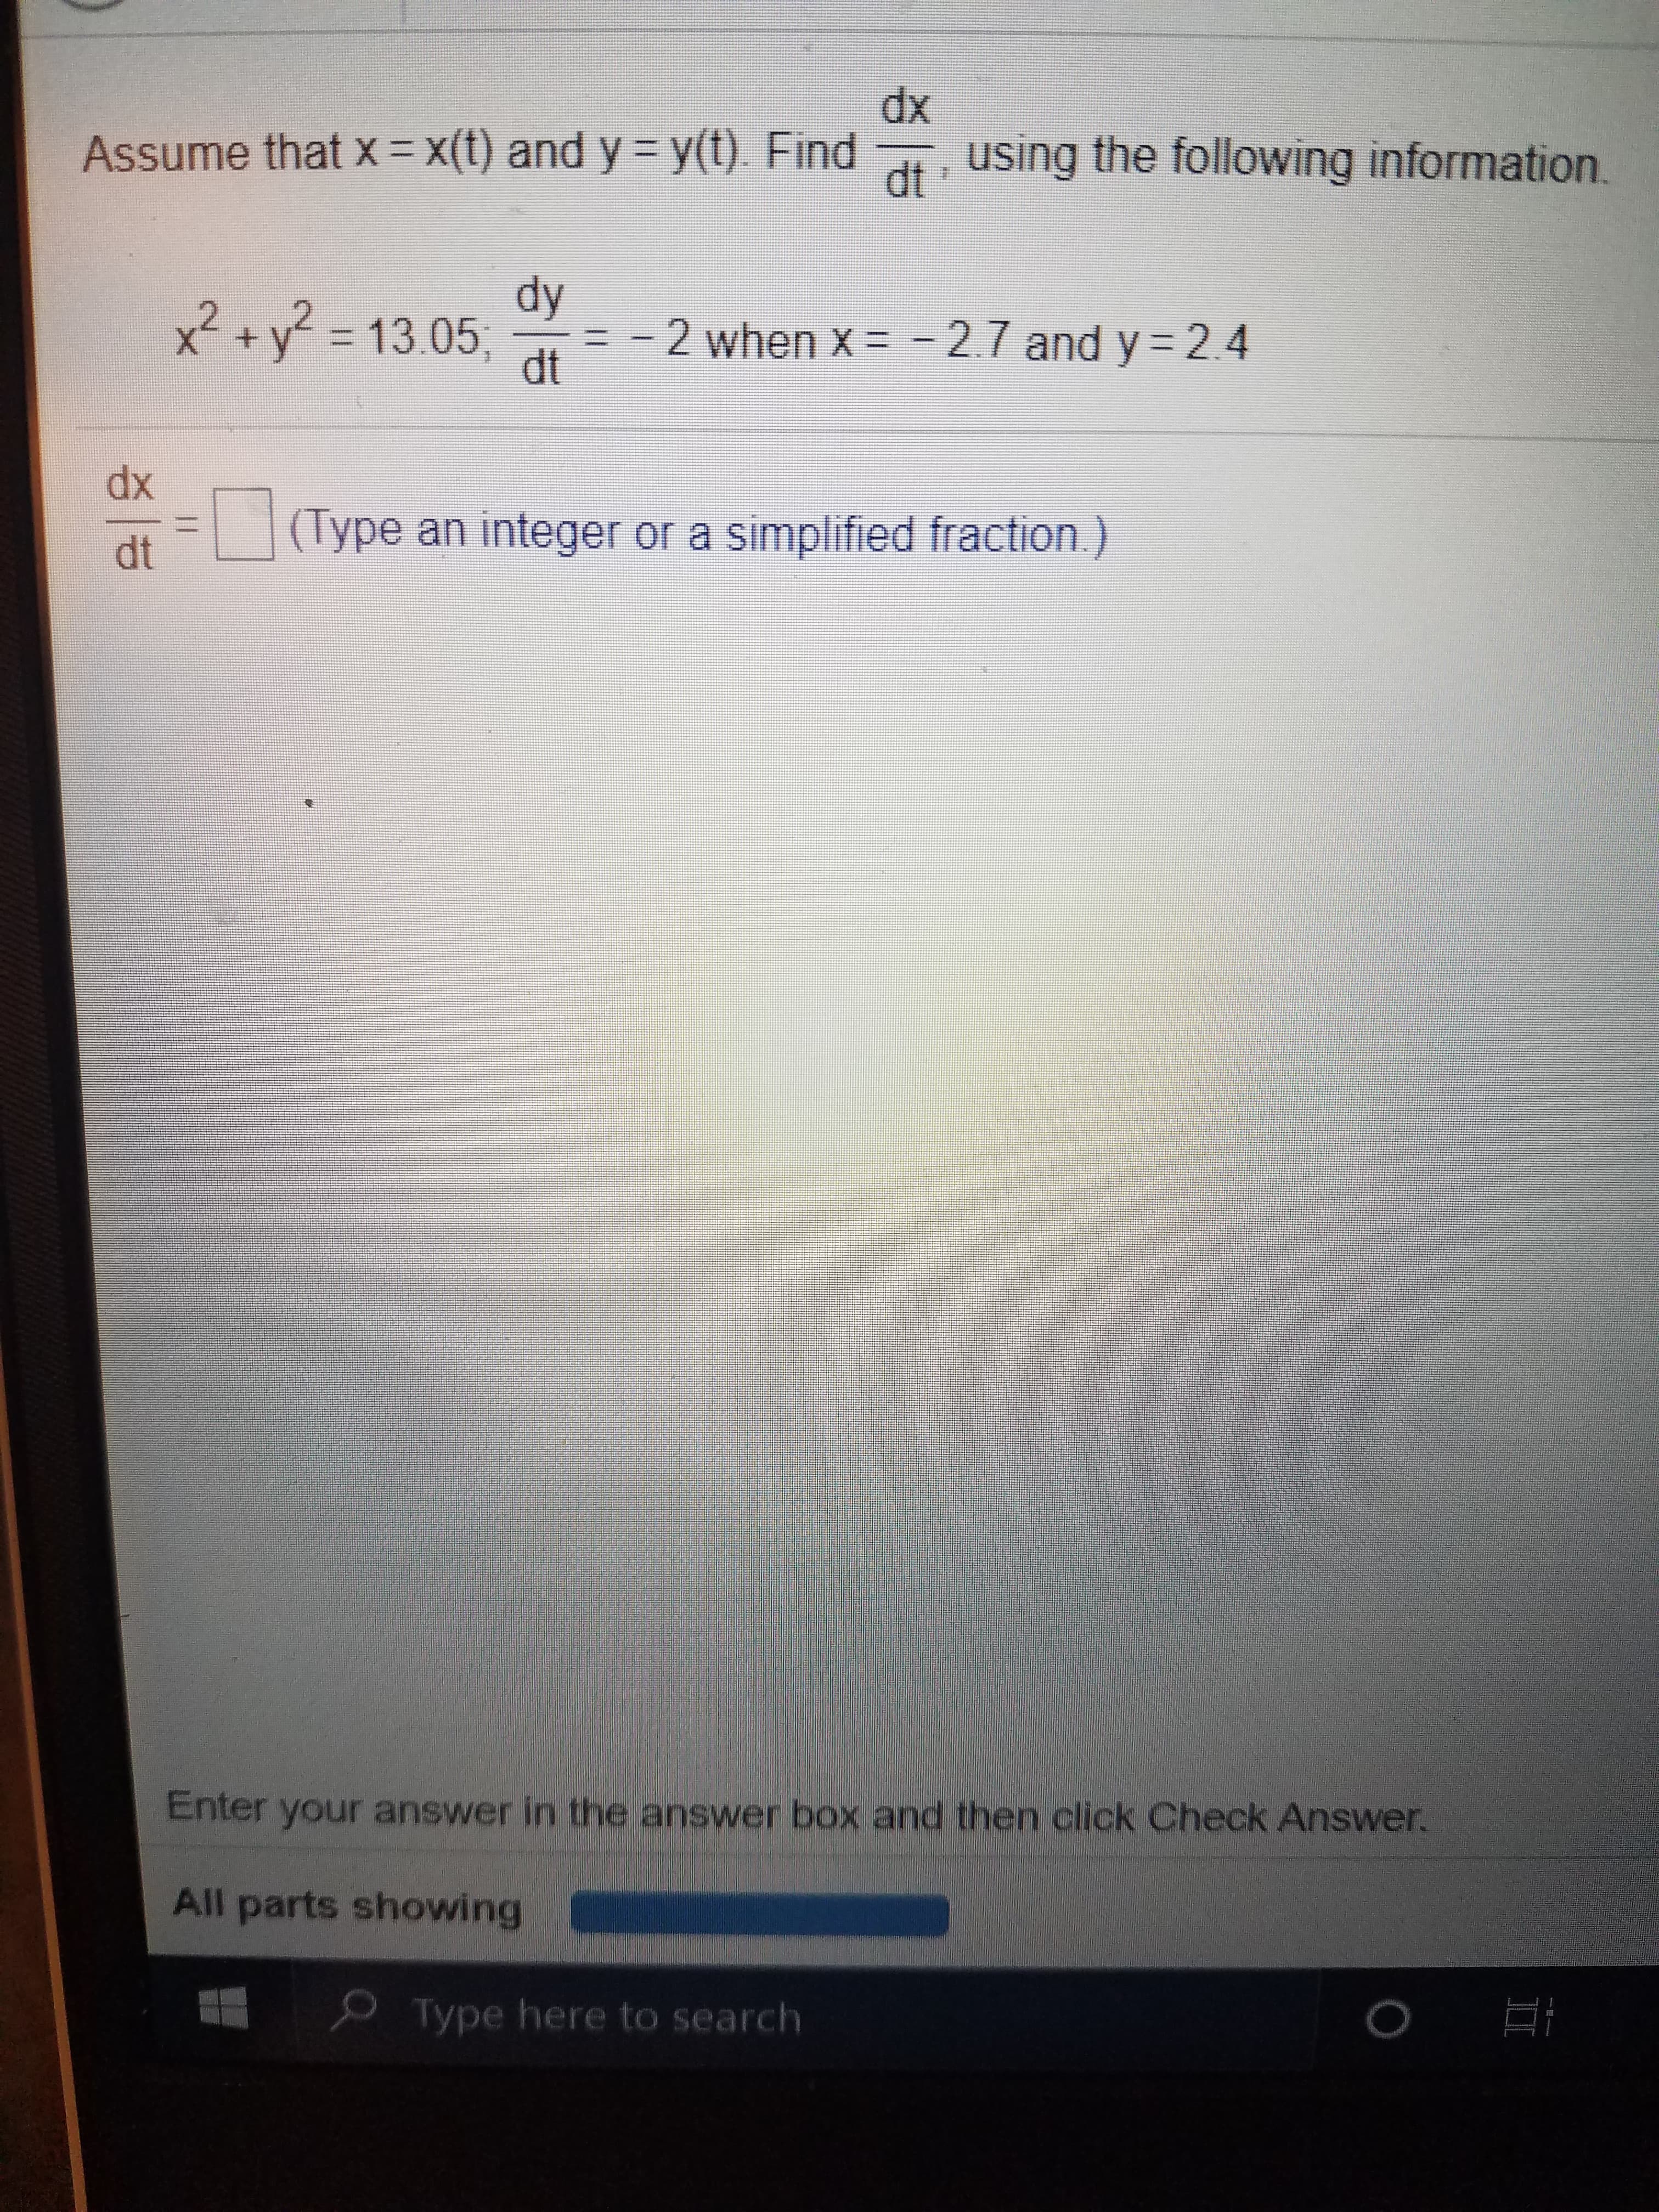 dx
using the following information.
Assume that x =x(t) and y
y(t) Find
dt
dy
x2 +y 13.05,
-27 and y 2.4
2 when x=
dt
dx
(Type an integer or a simplified fraction.)
dt
Enter your answer in the answer box and then click Check Answer.
All parts showing
Type here to search
O
